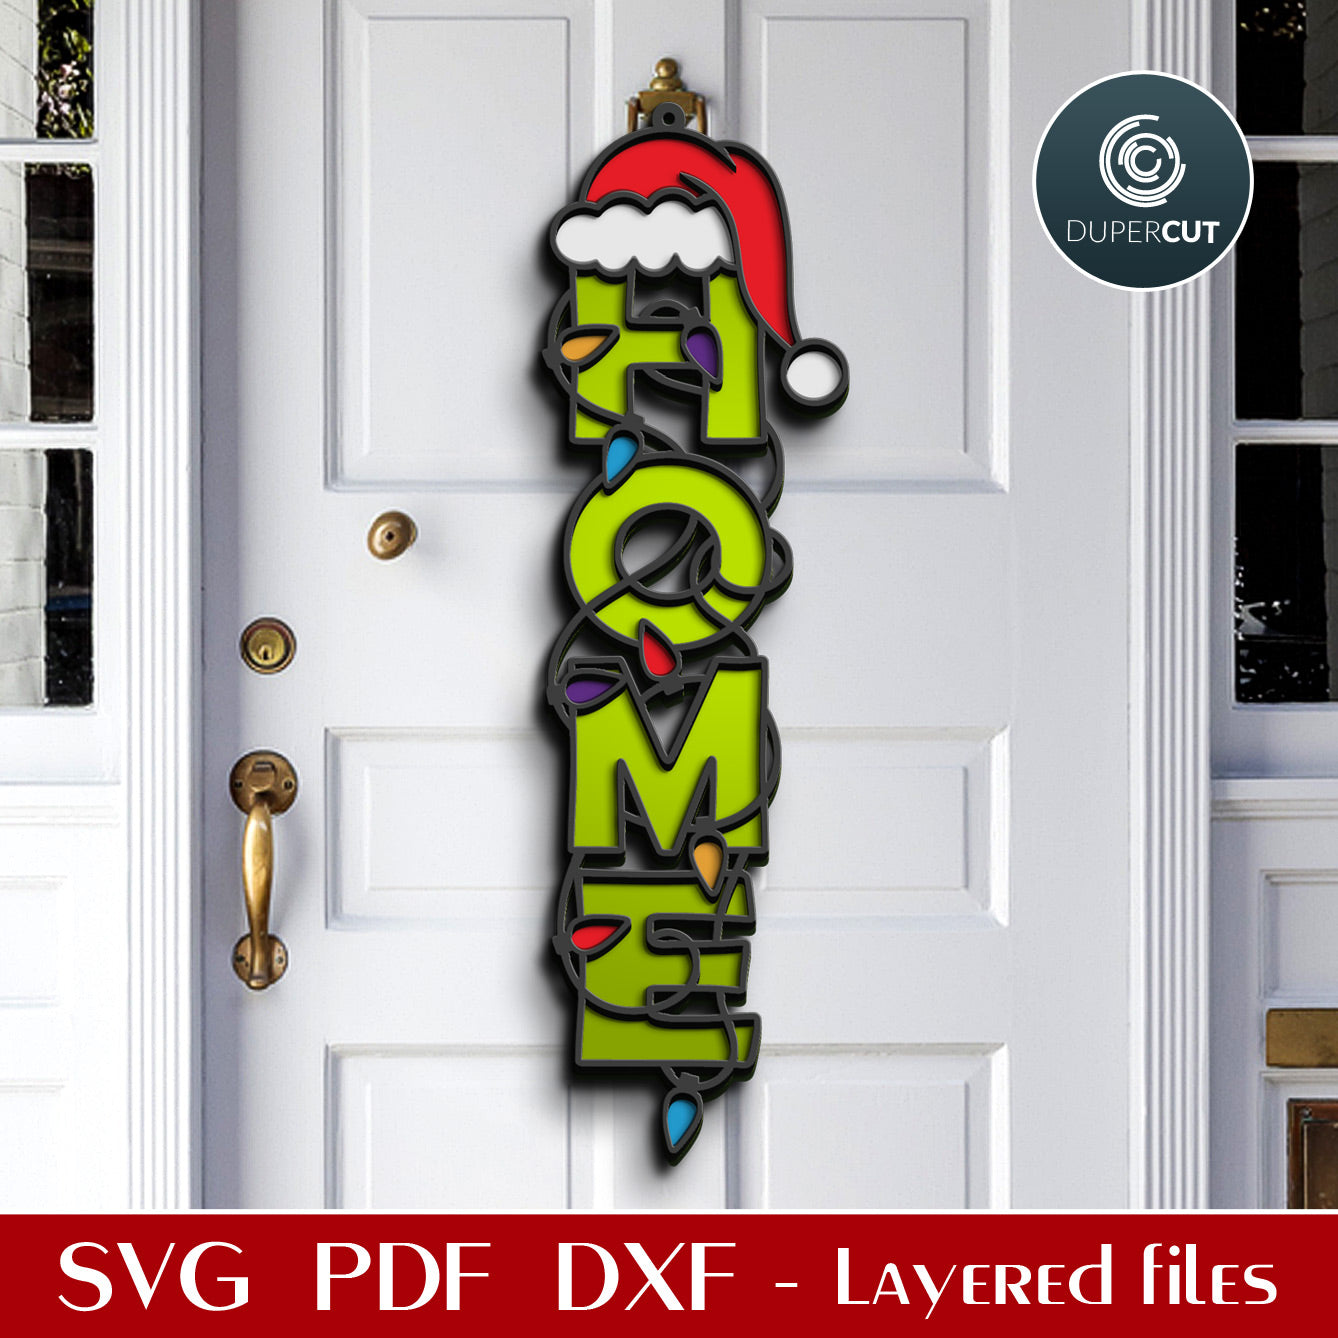 Christmas door diy hangers bundle home sign - on sale 60% savings - SVG DXF layered laser cutting files for Glowforge, Cricut, Silhouette, scroll saw, CNC plasma machines by DuperCut 